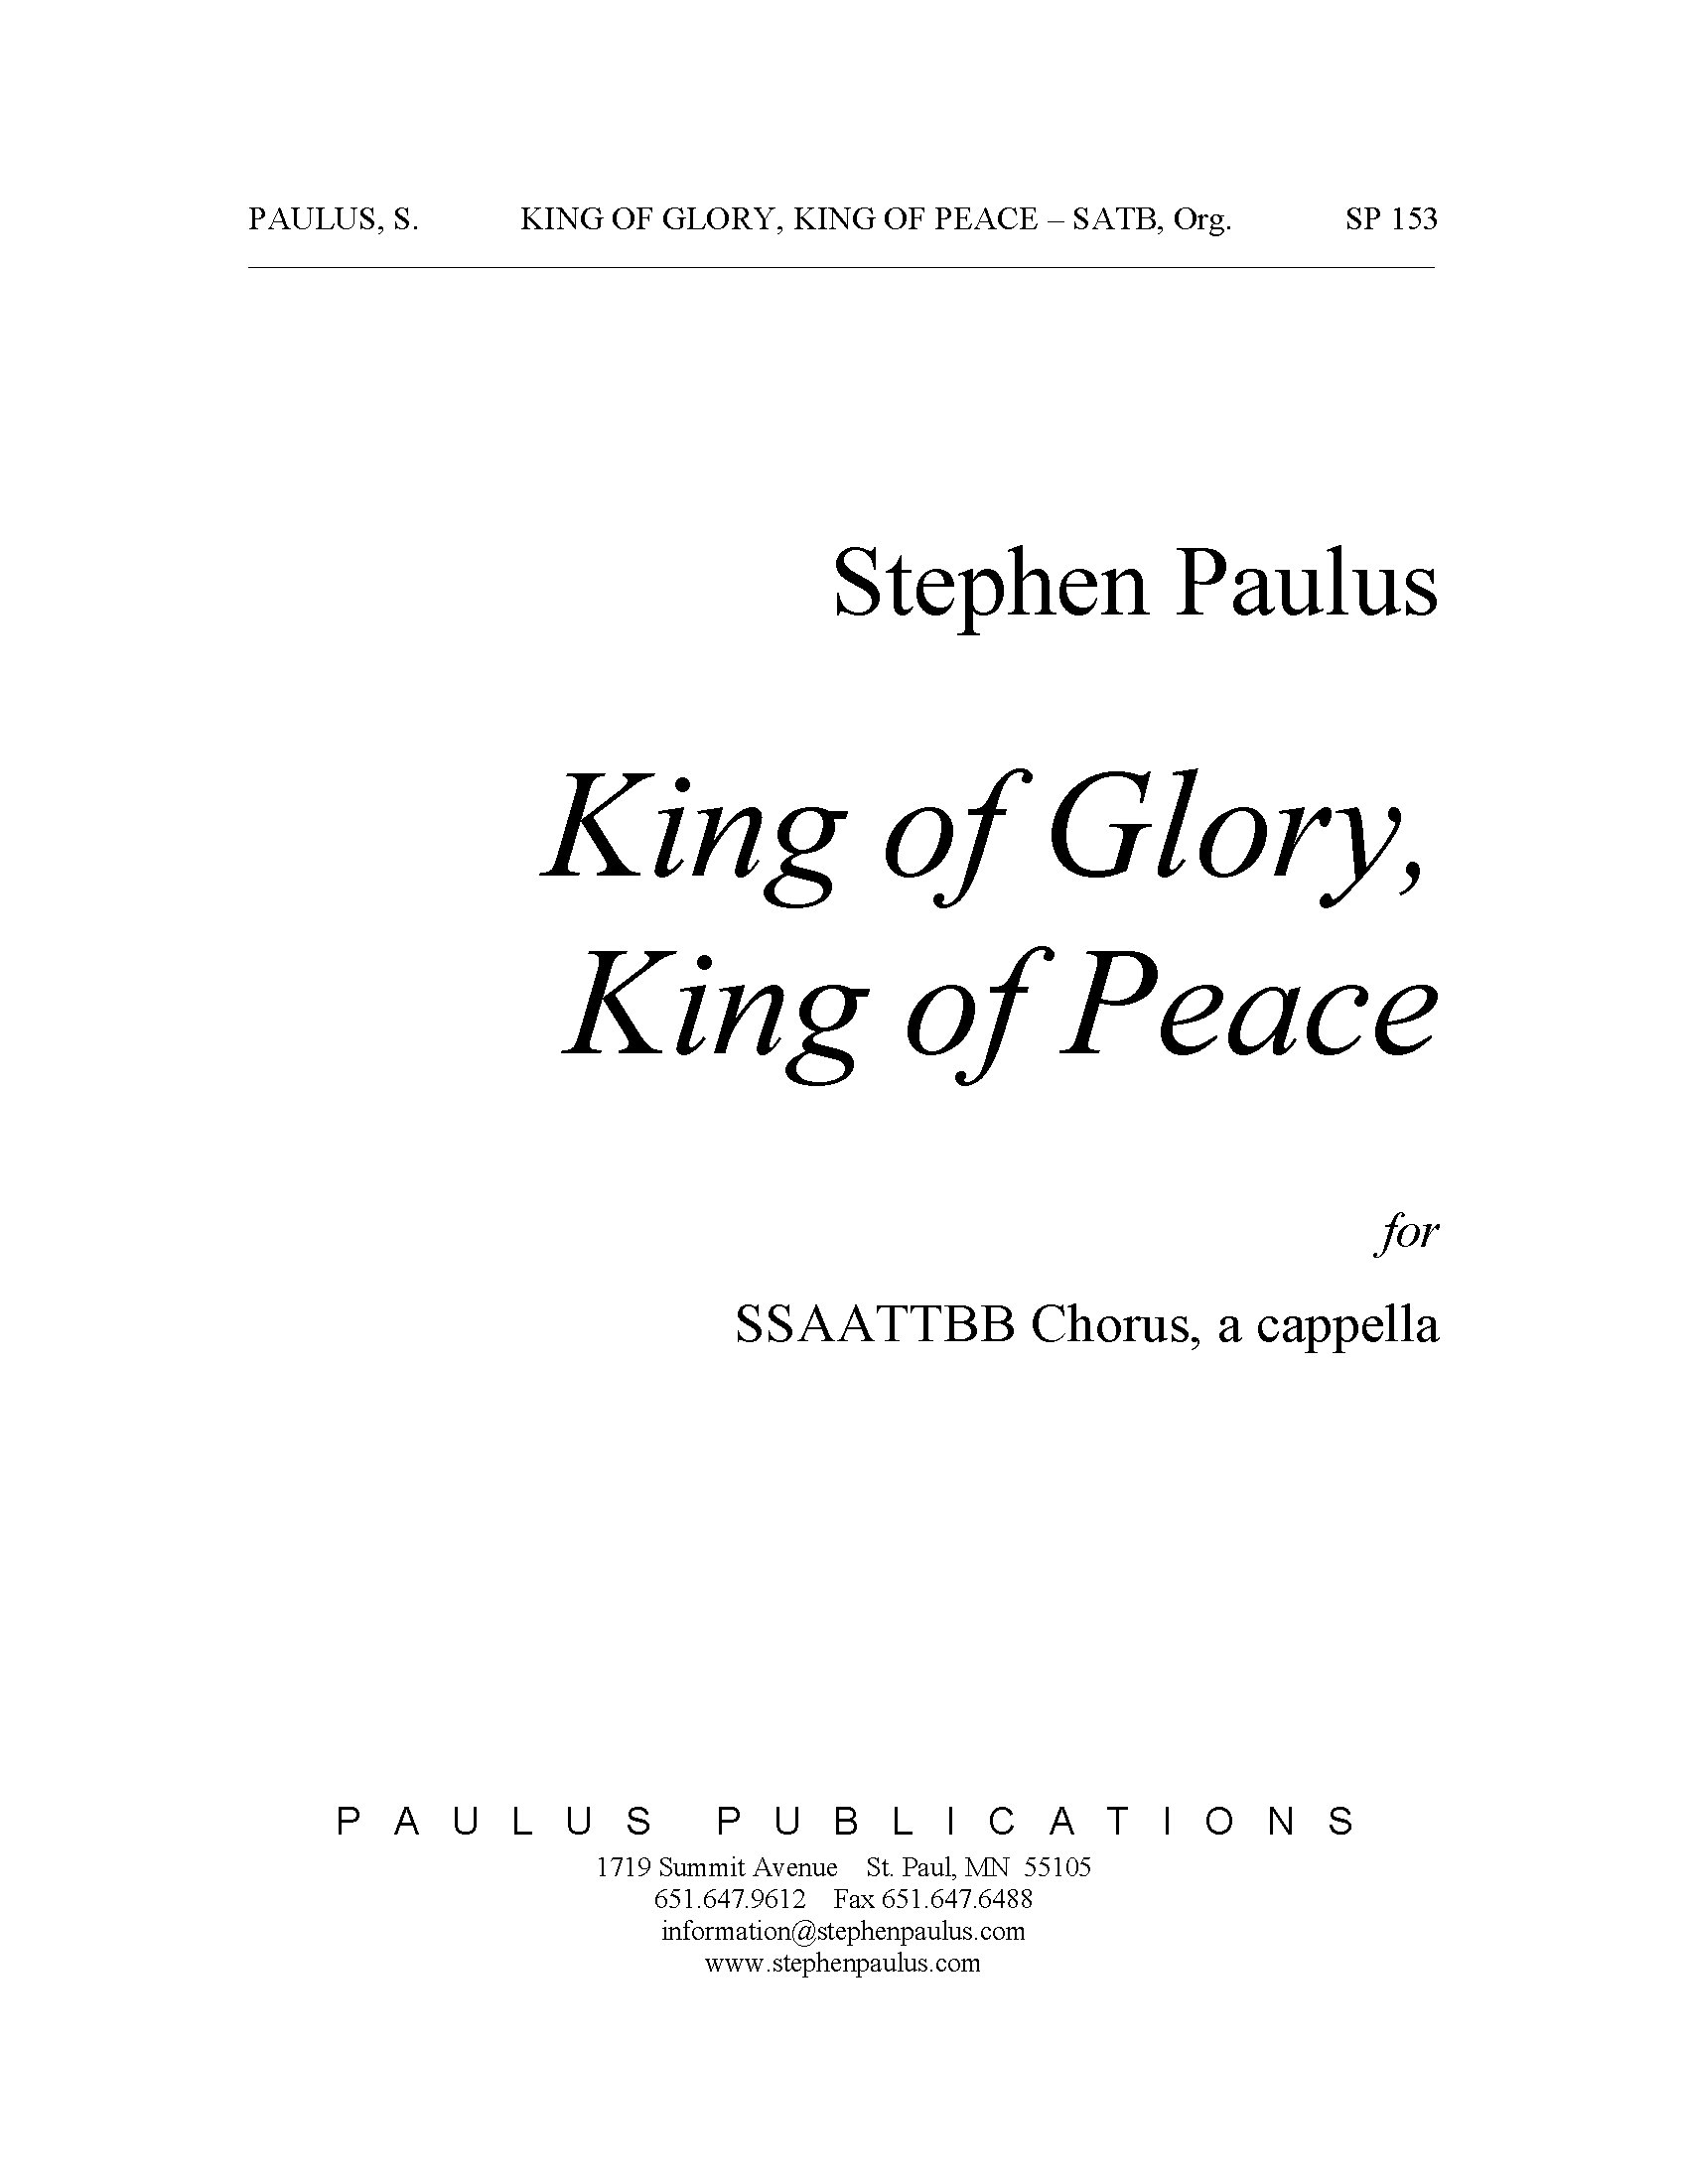 King of Glory, King of Peace for SSAATTBB Chorus, a cappella